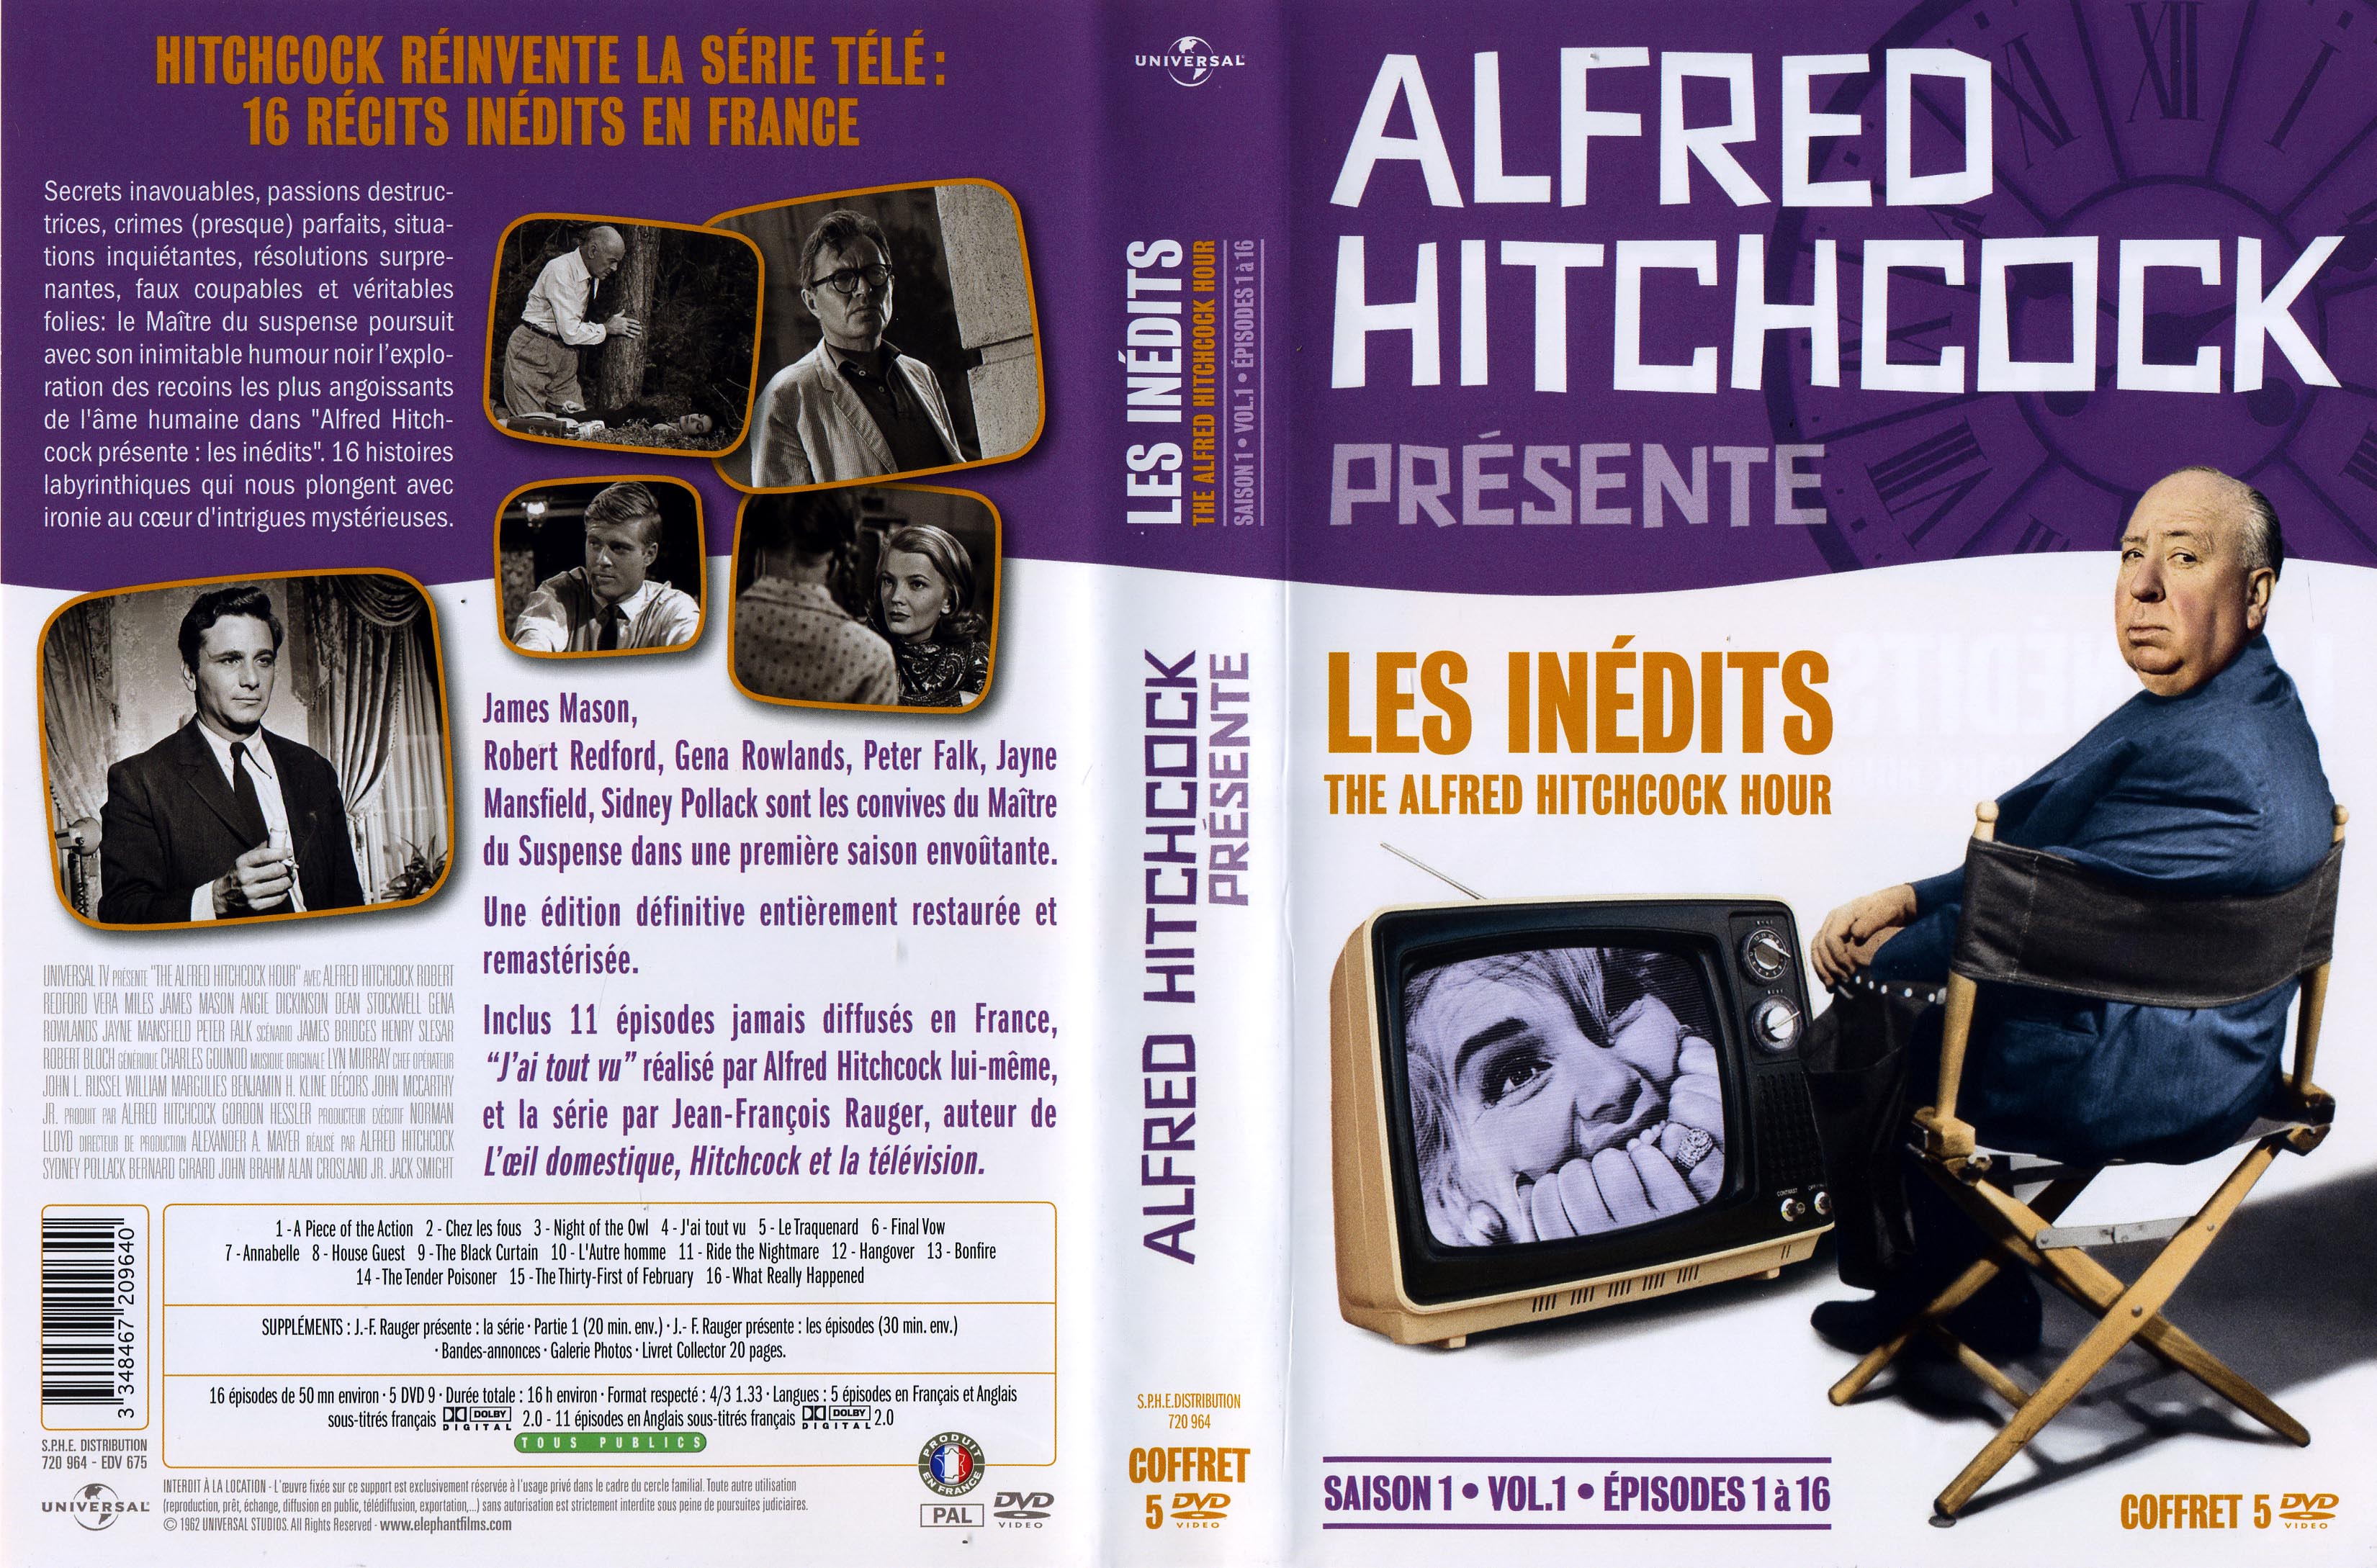 Alfred hitchcock hour annabel